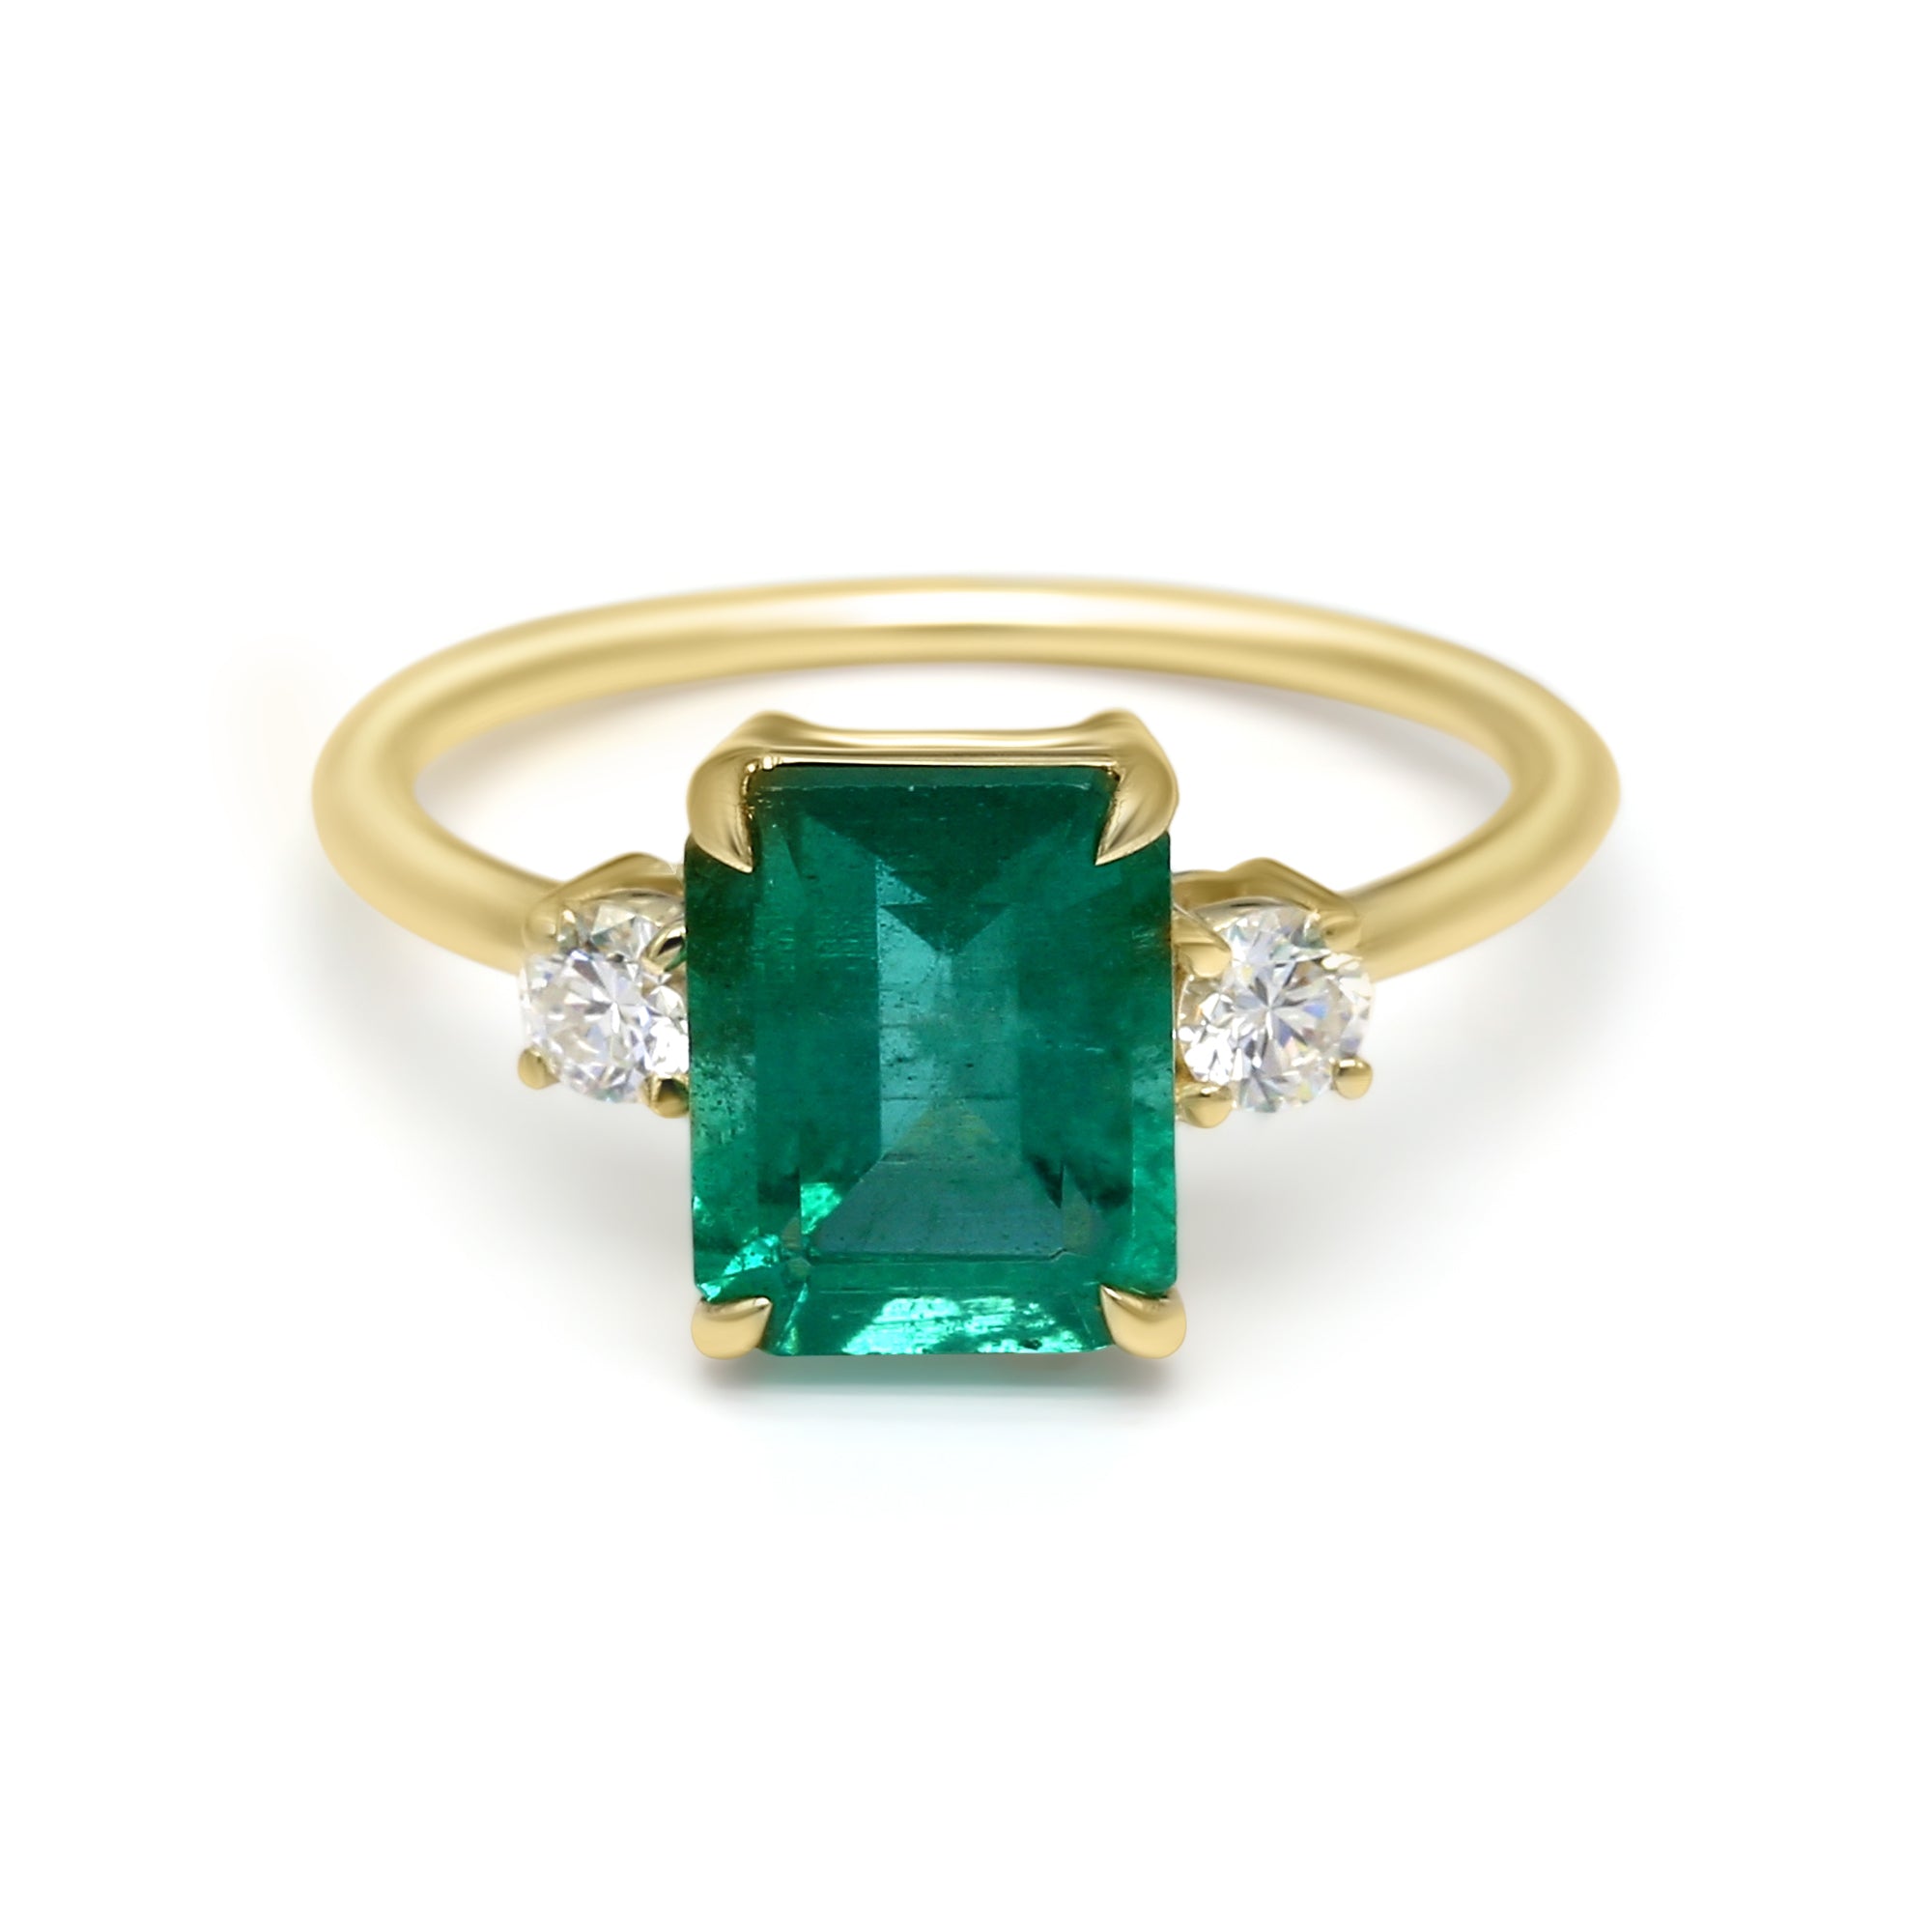 Emerald with Side Stone Ring - 2.67ct TW